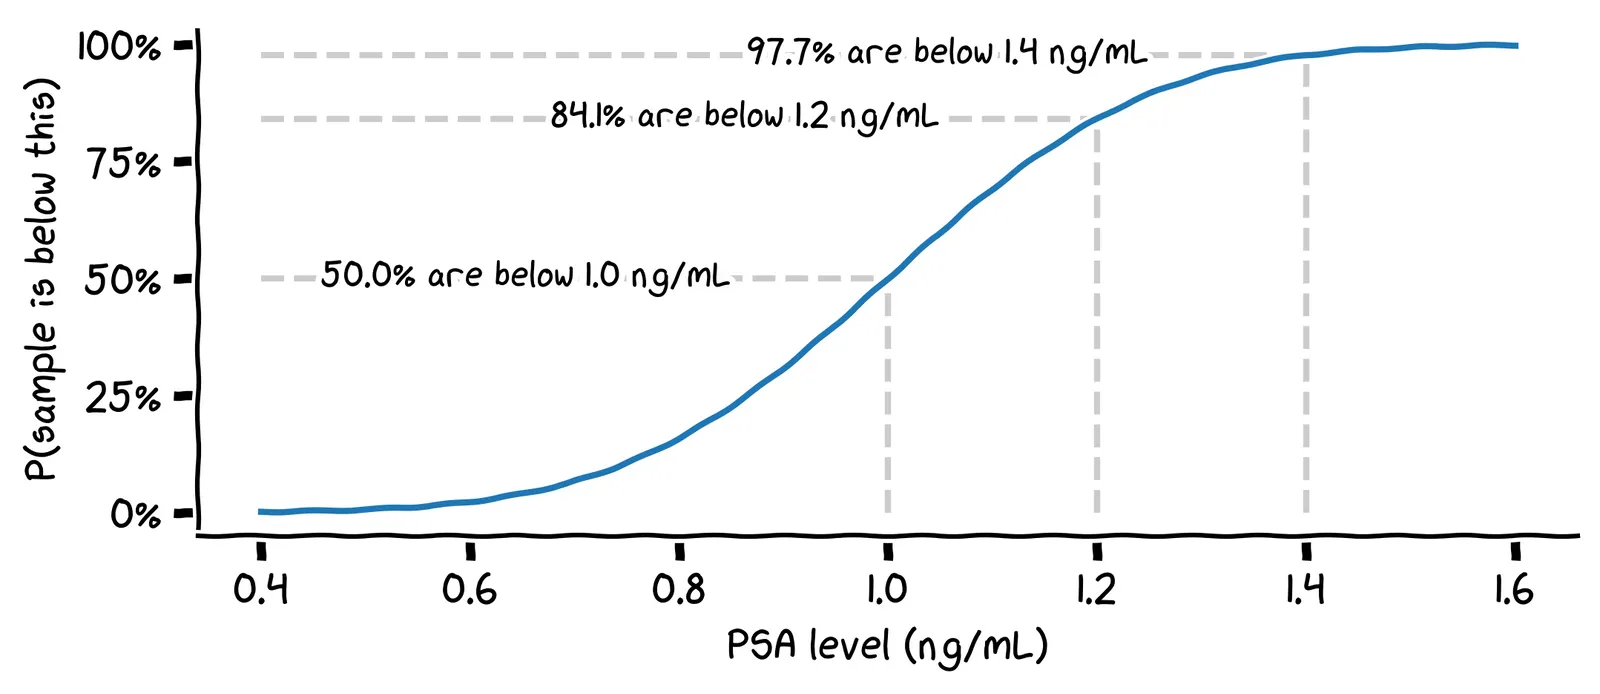 A chart of the cumulative distribution function of a normal distribution with a mean of 1.0 and a standard deviation of 0.2.